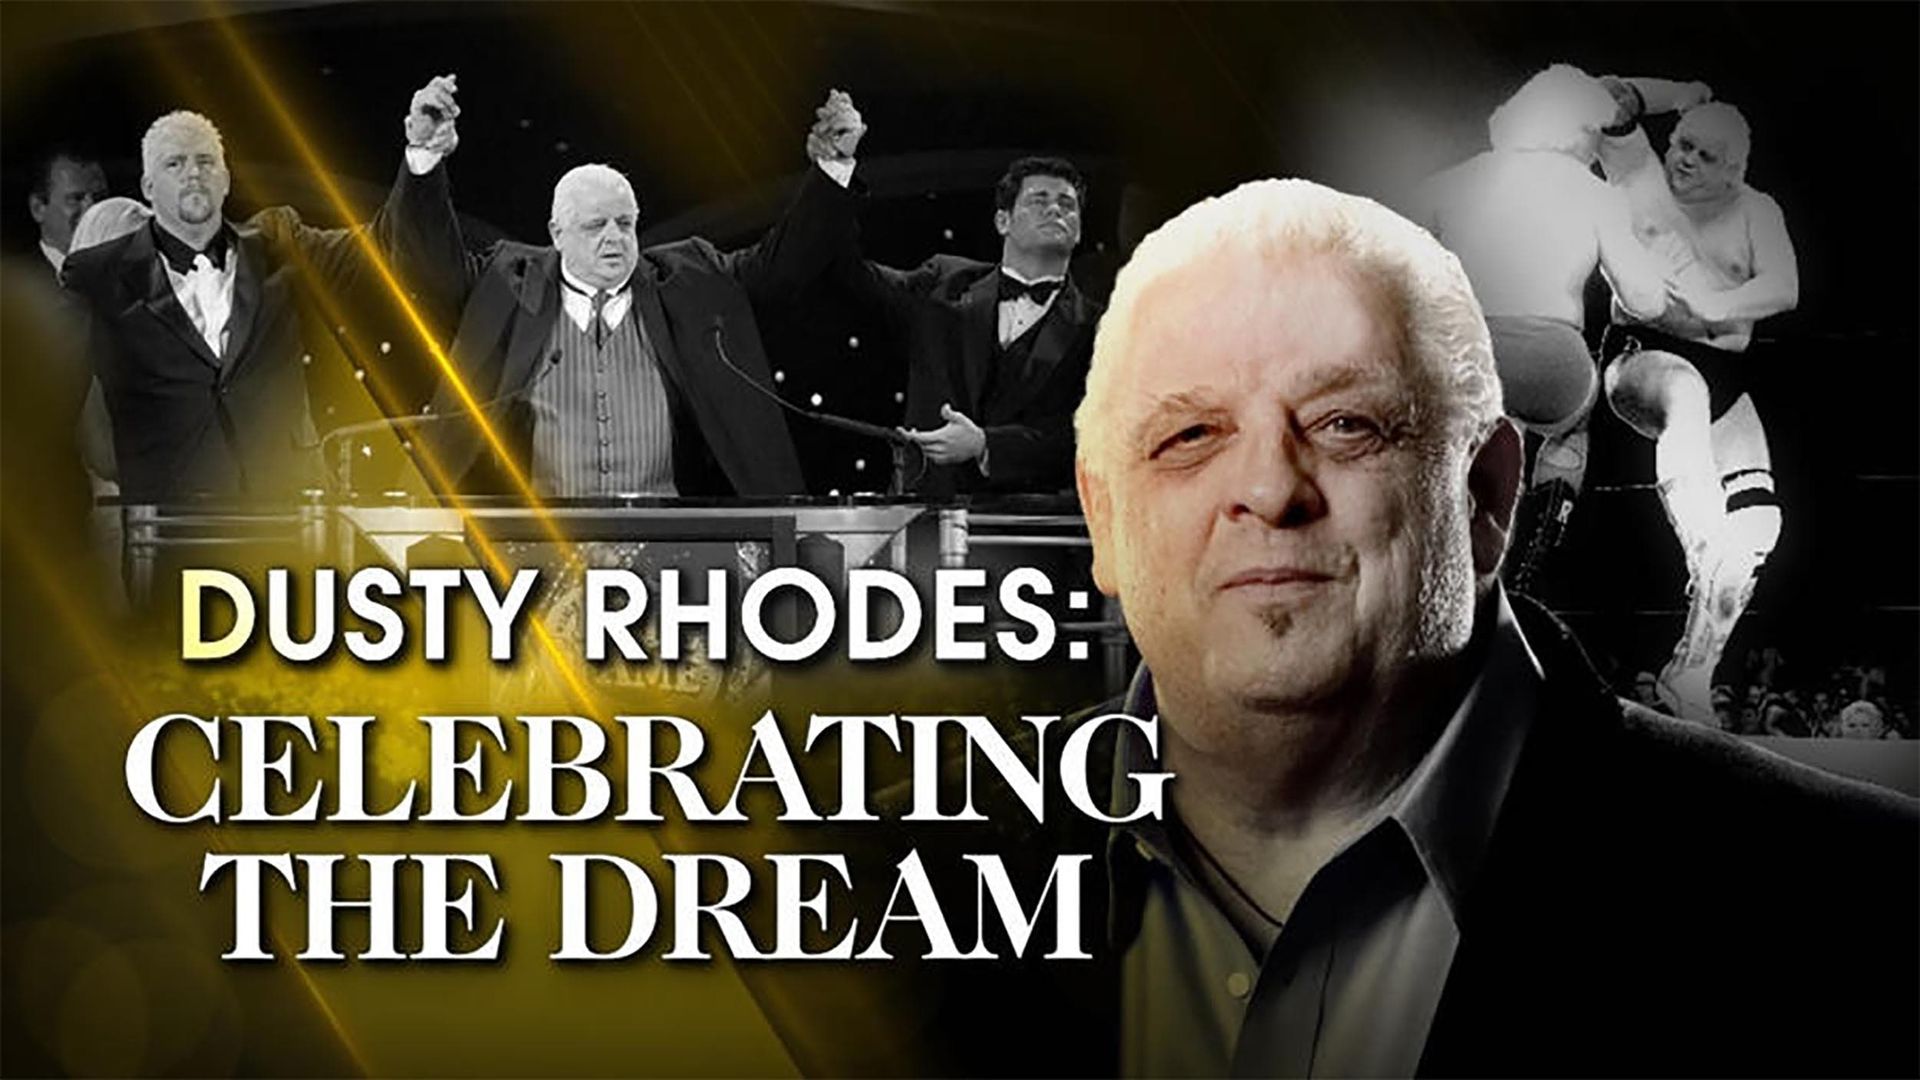 Dusty Rhodes: Celebrating the Dream background